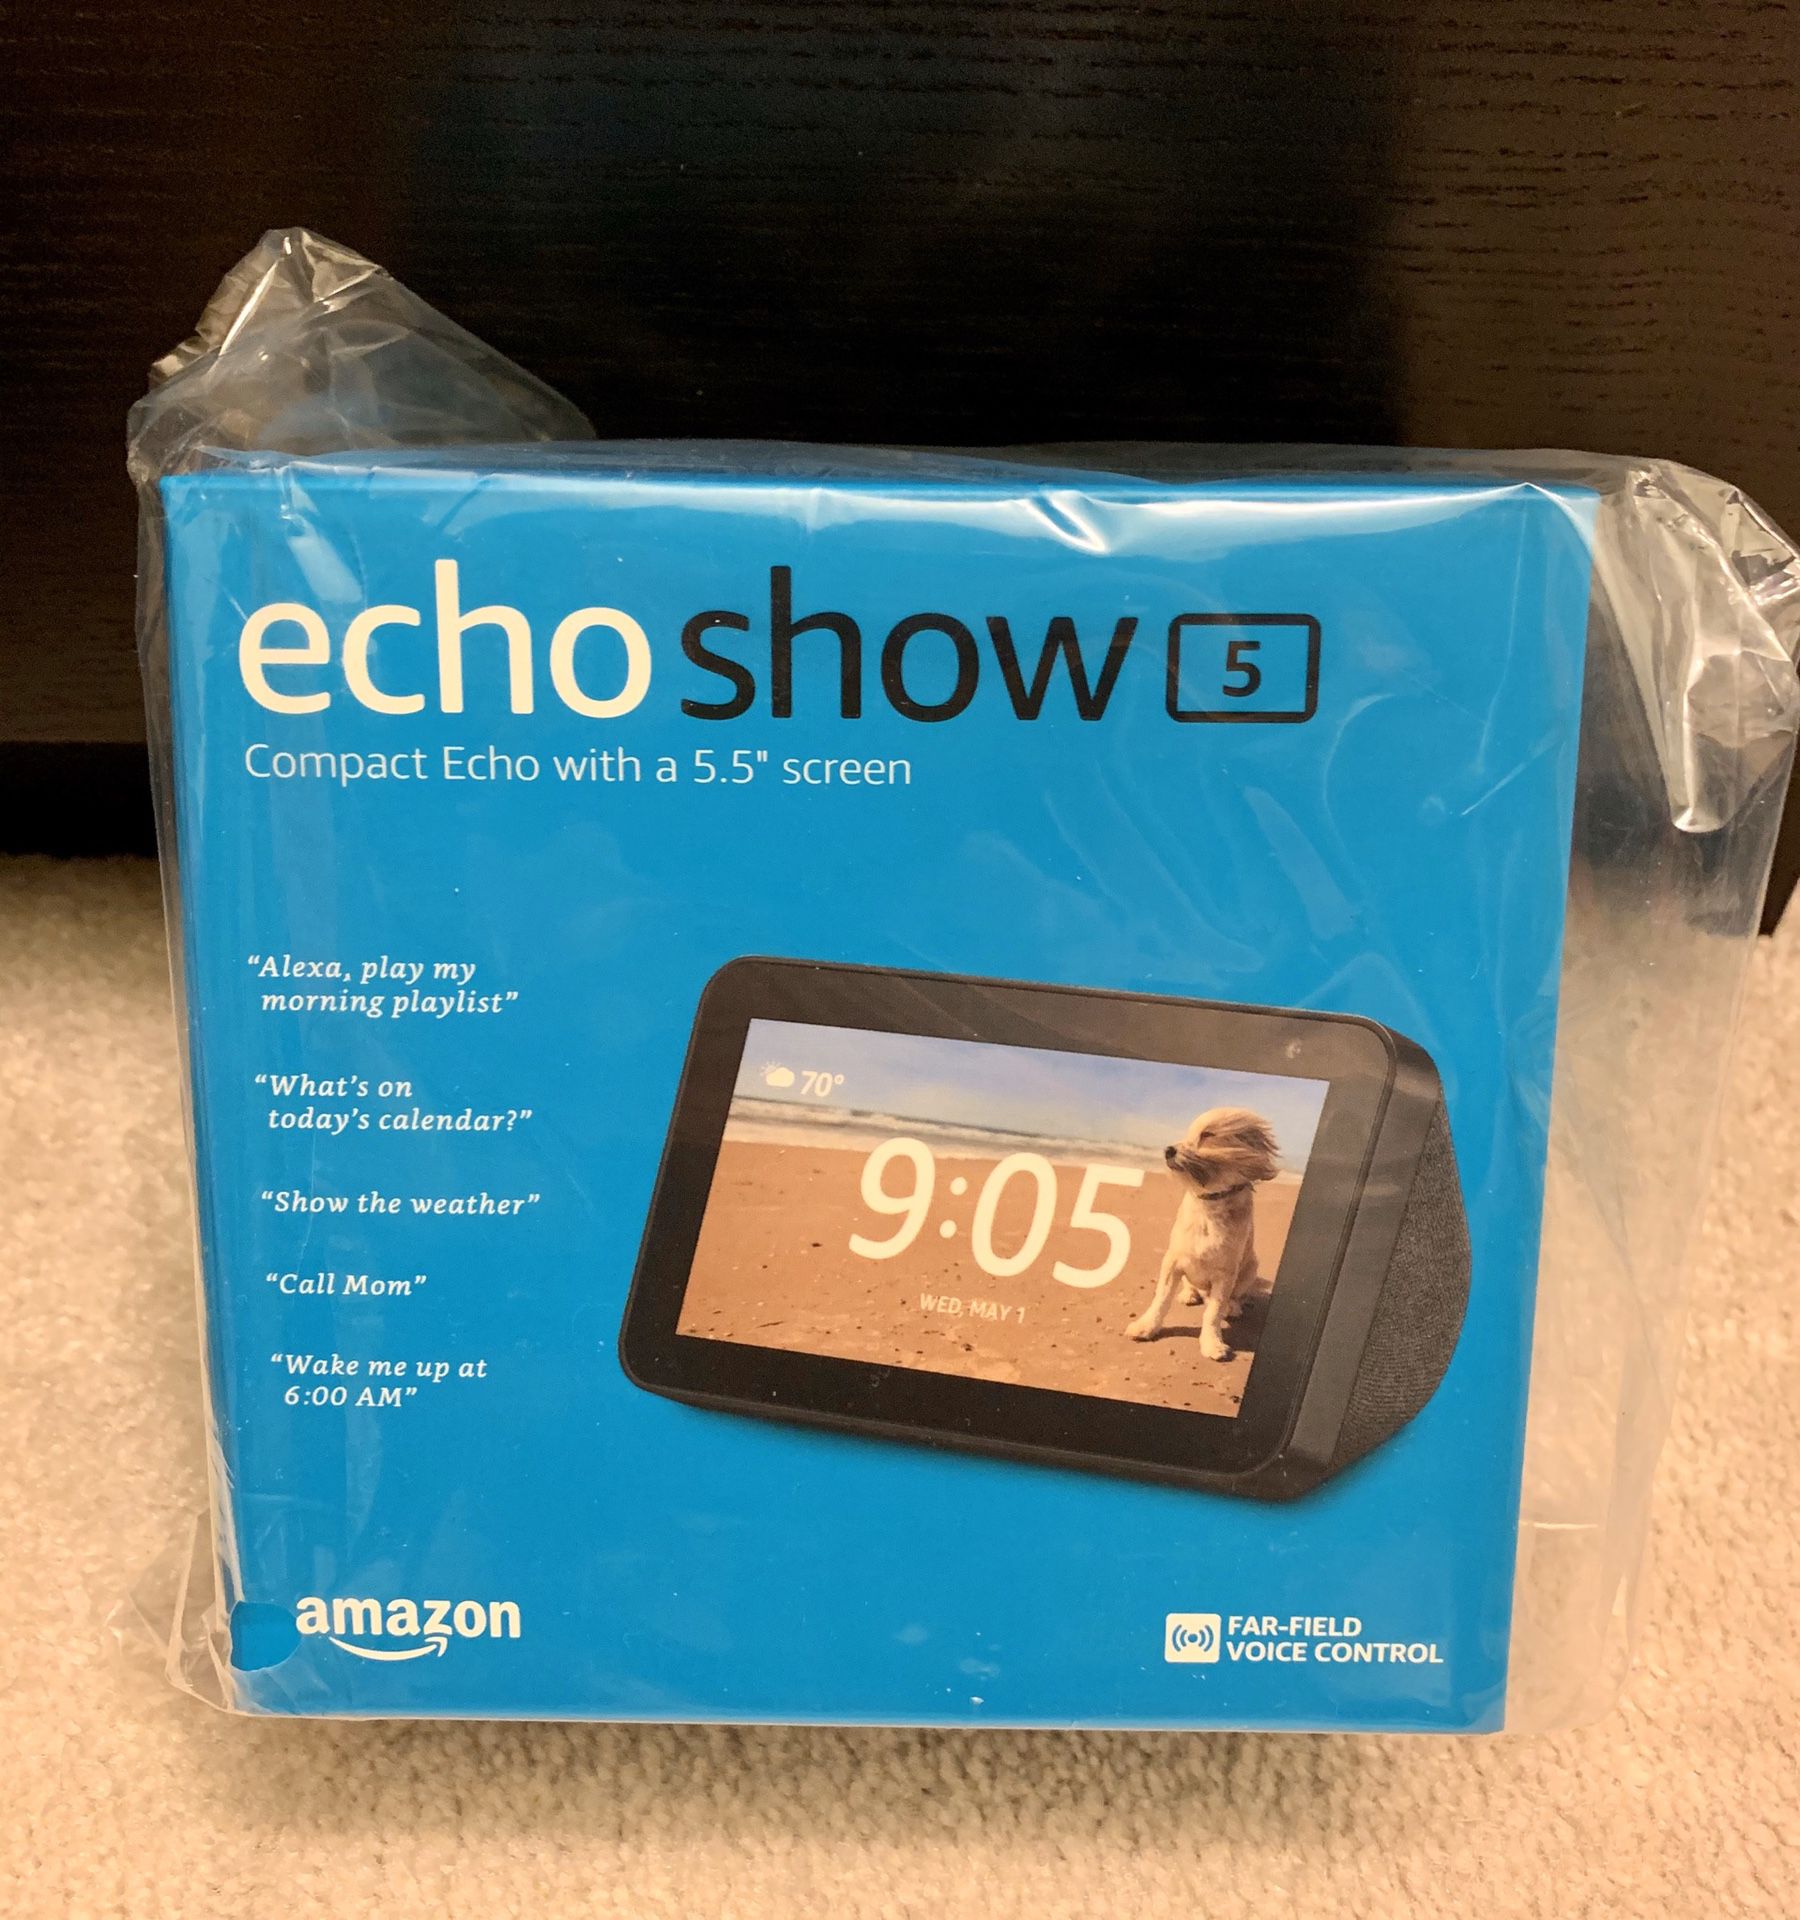 Brand new Amazon Echo show 5 with 5.5” screen